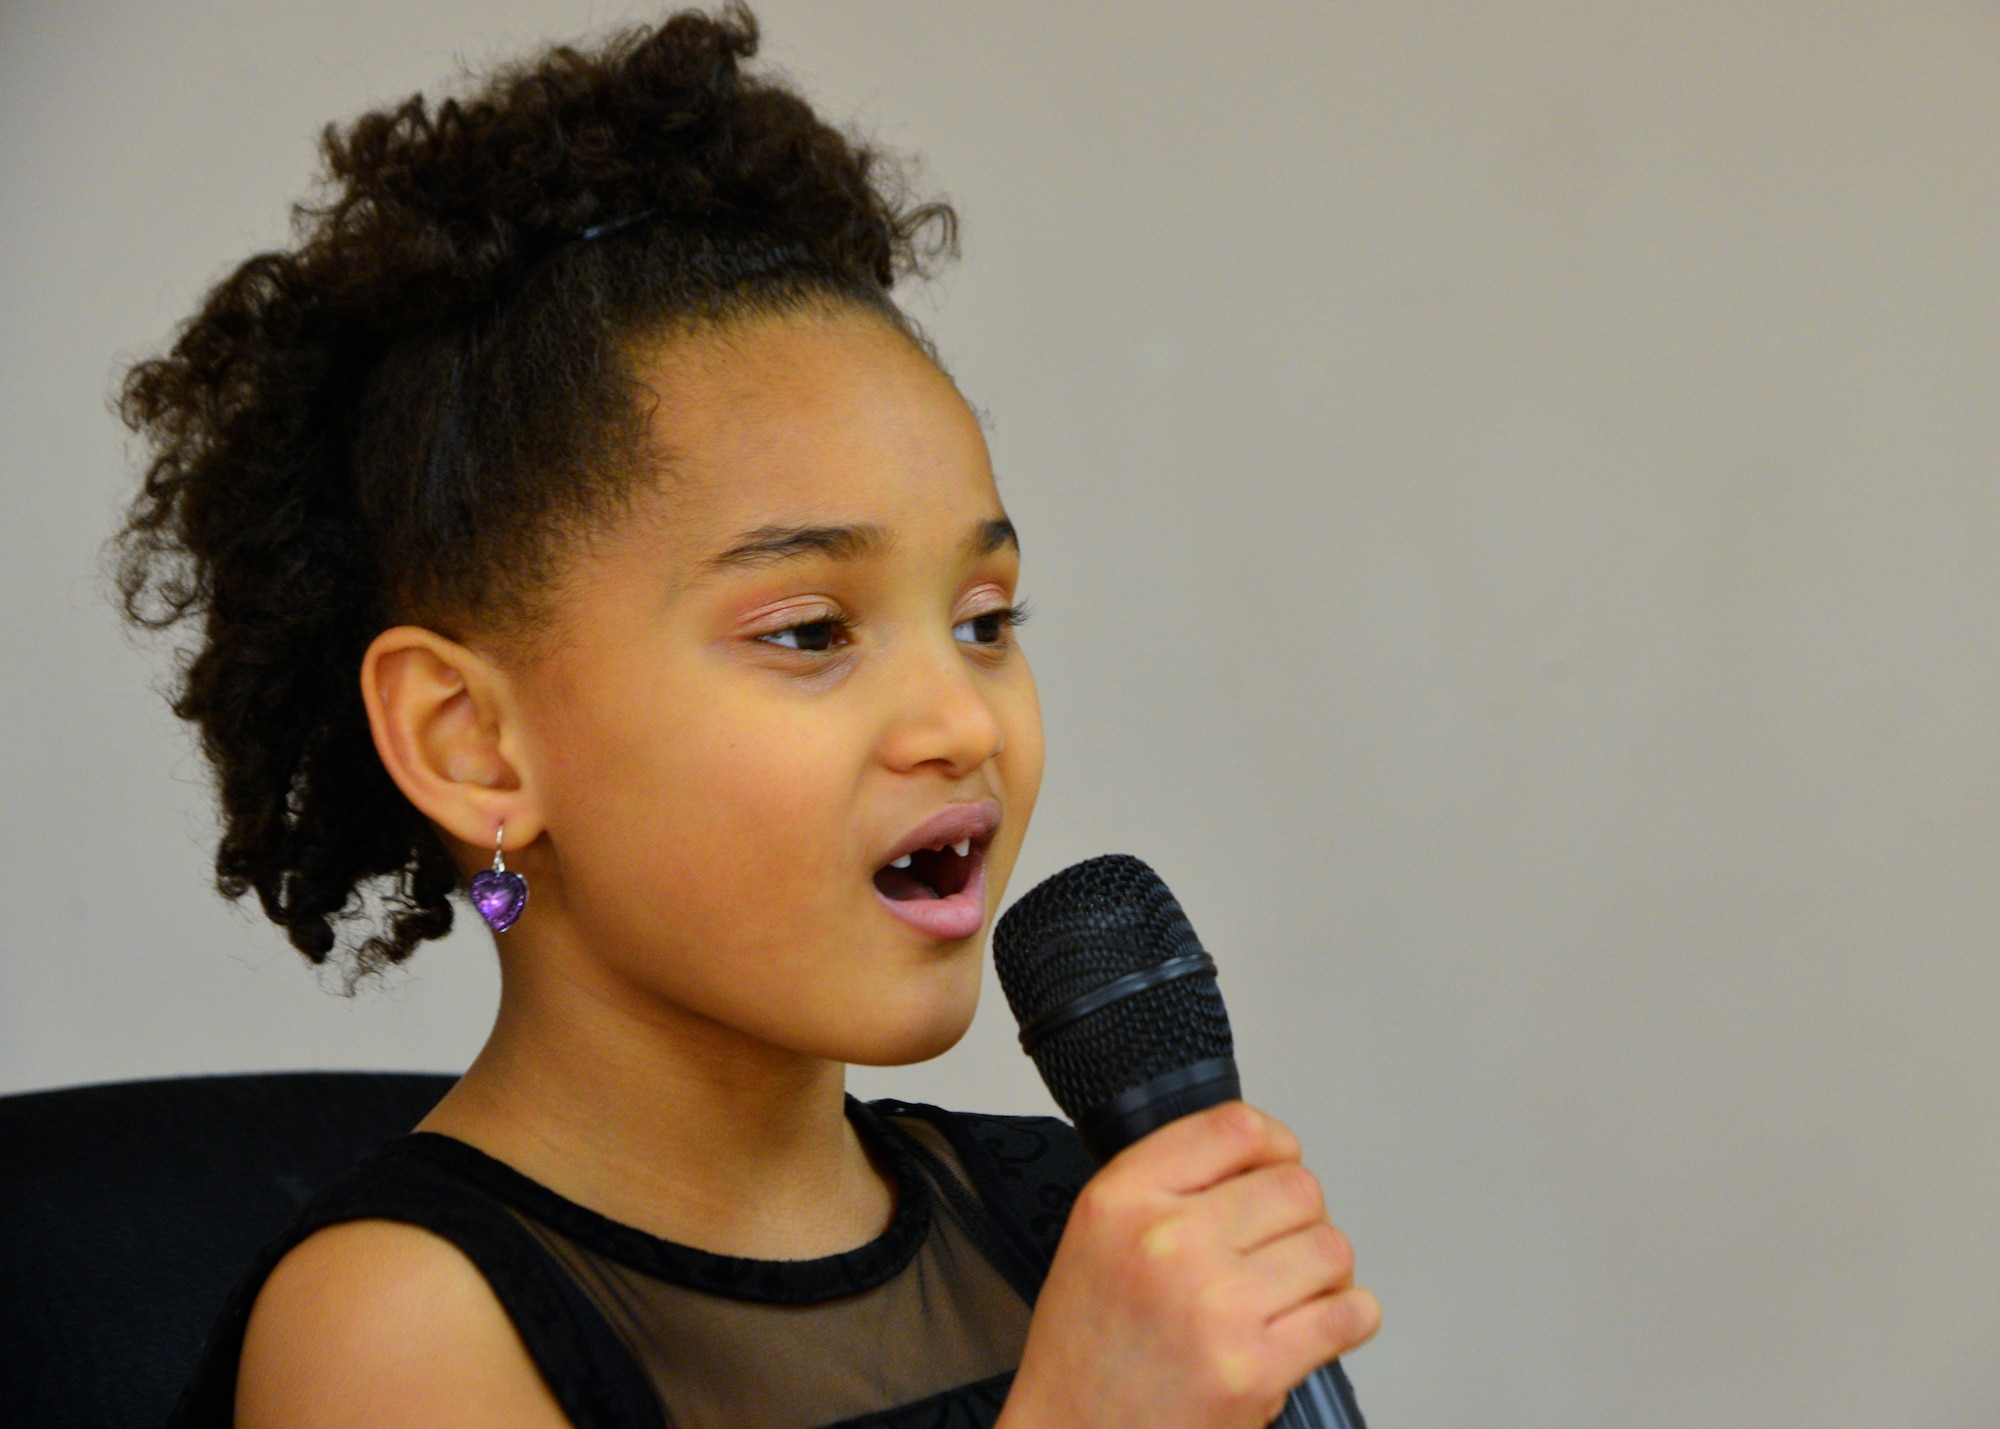 Kennedy Cordle, daughter of Staff Sgt. Brandon Cordle, 436th Civil Engineer Squadron power production craftsman, performs her singing routine March 1, 2014, at the Youth Center on Dover Air Force Base, Del. Kennedy sang “Greatest Love of All” by Whitney Houston to win first place in the Air Force “U Got Talent” competition. (U.S. Air Force photo/Airman 1st Class William Johnson)